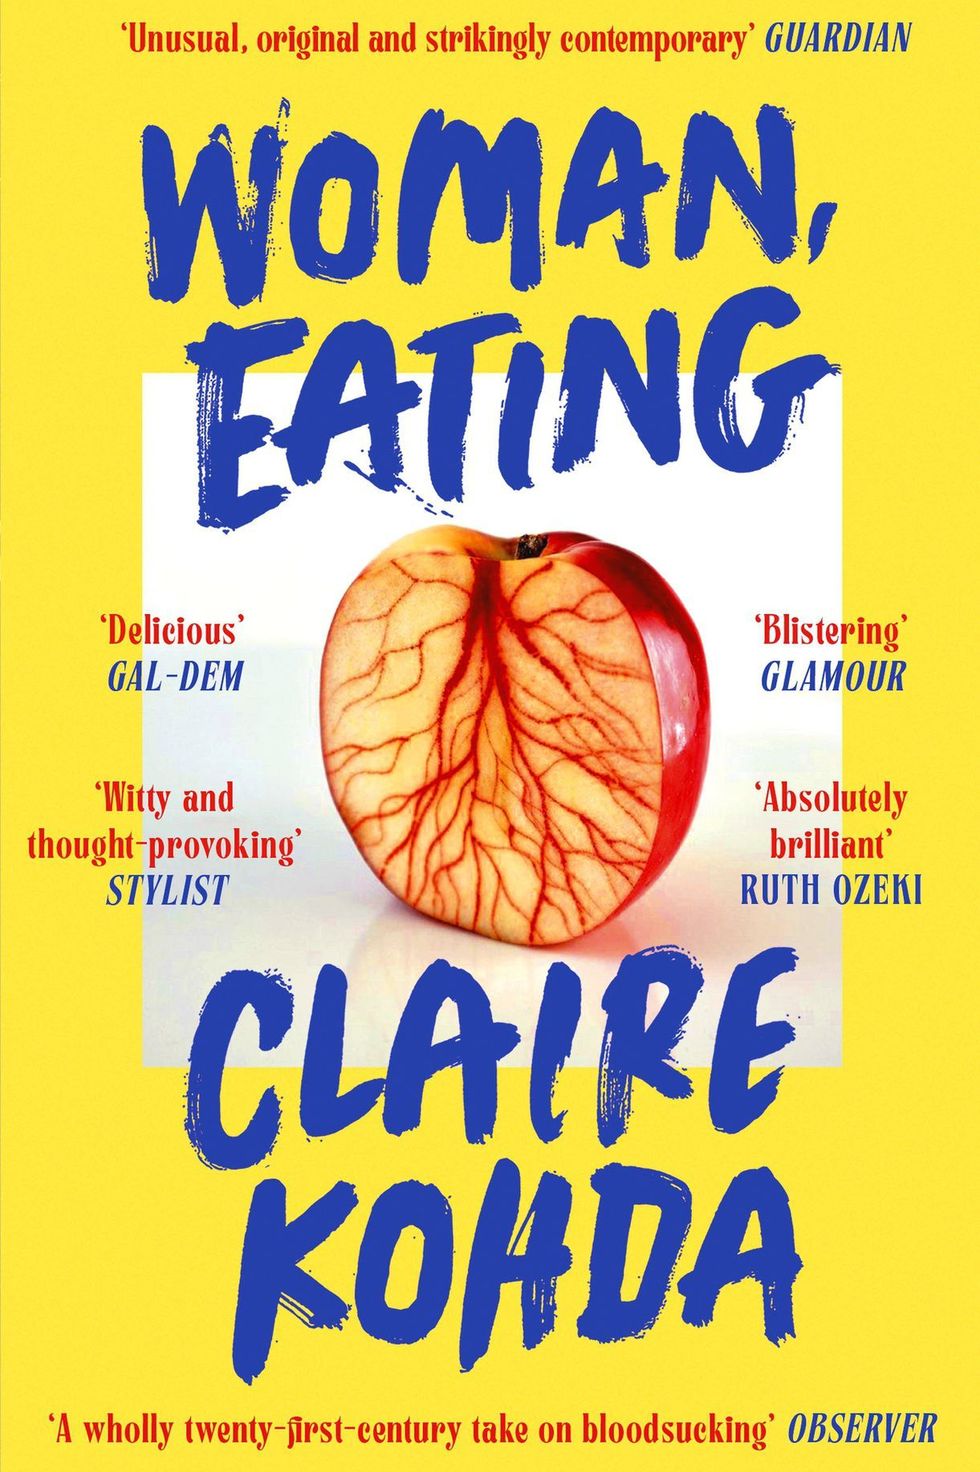 'Woman, Eating' by Claire Kohda